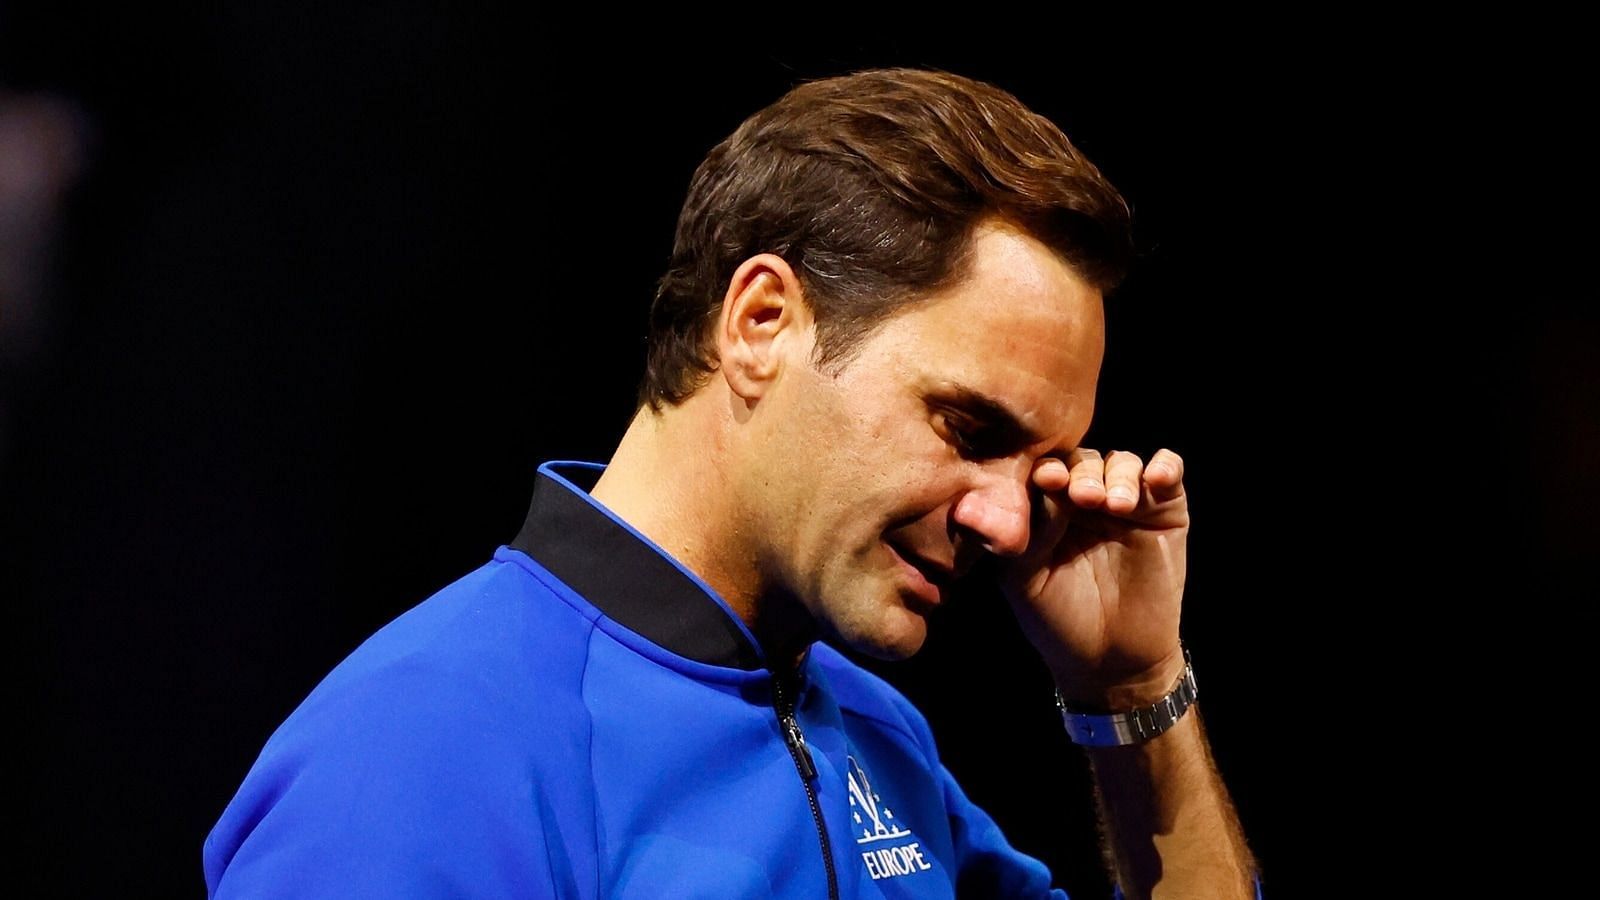 Roger Federer cries during his retirement ceremony at the 2022 Laver Cup